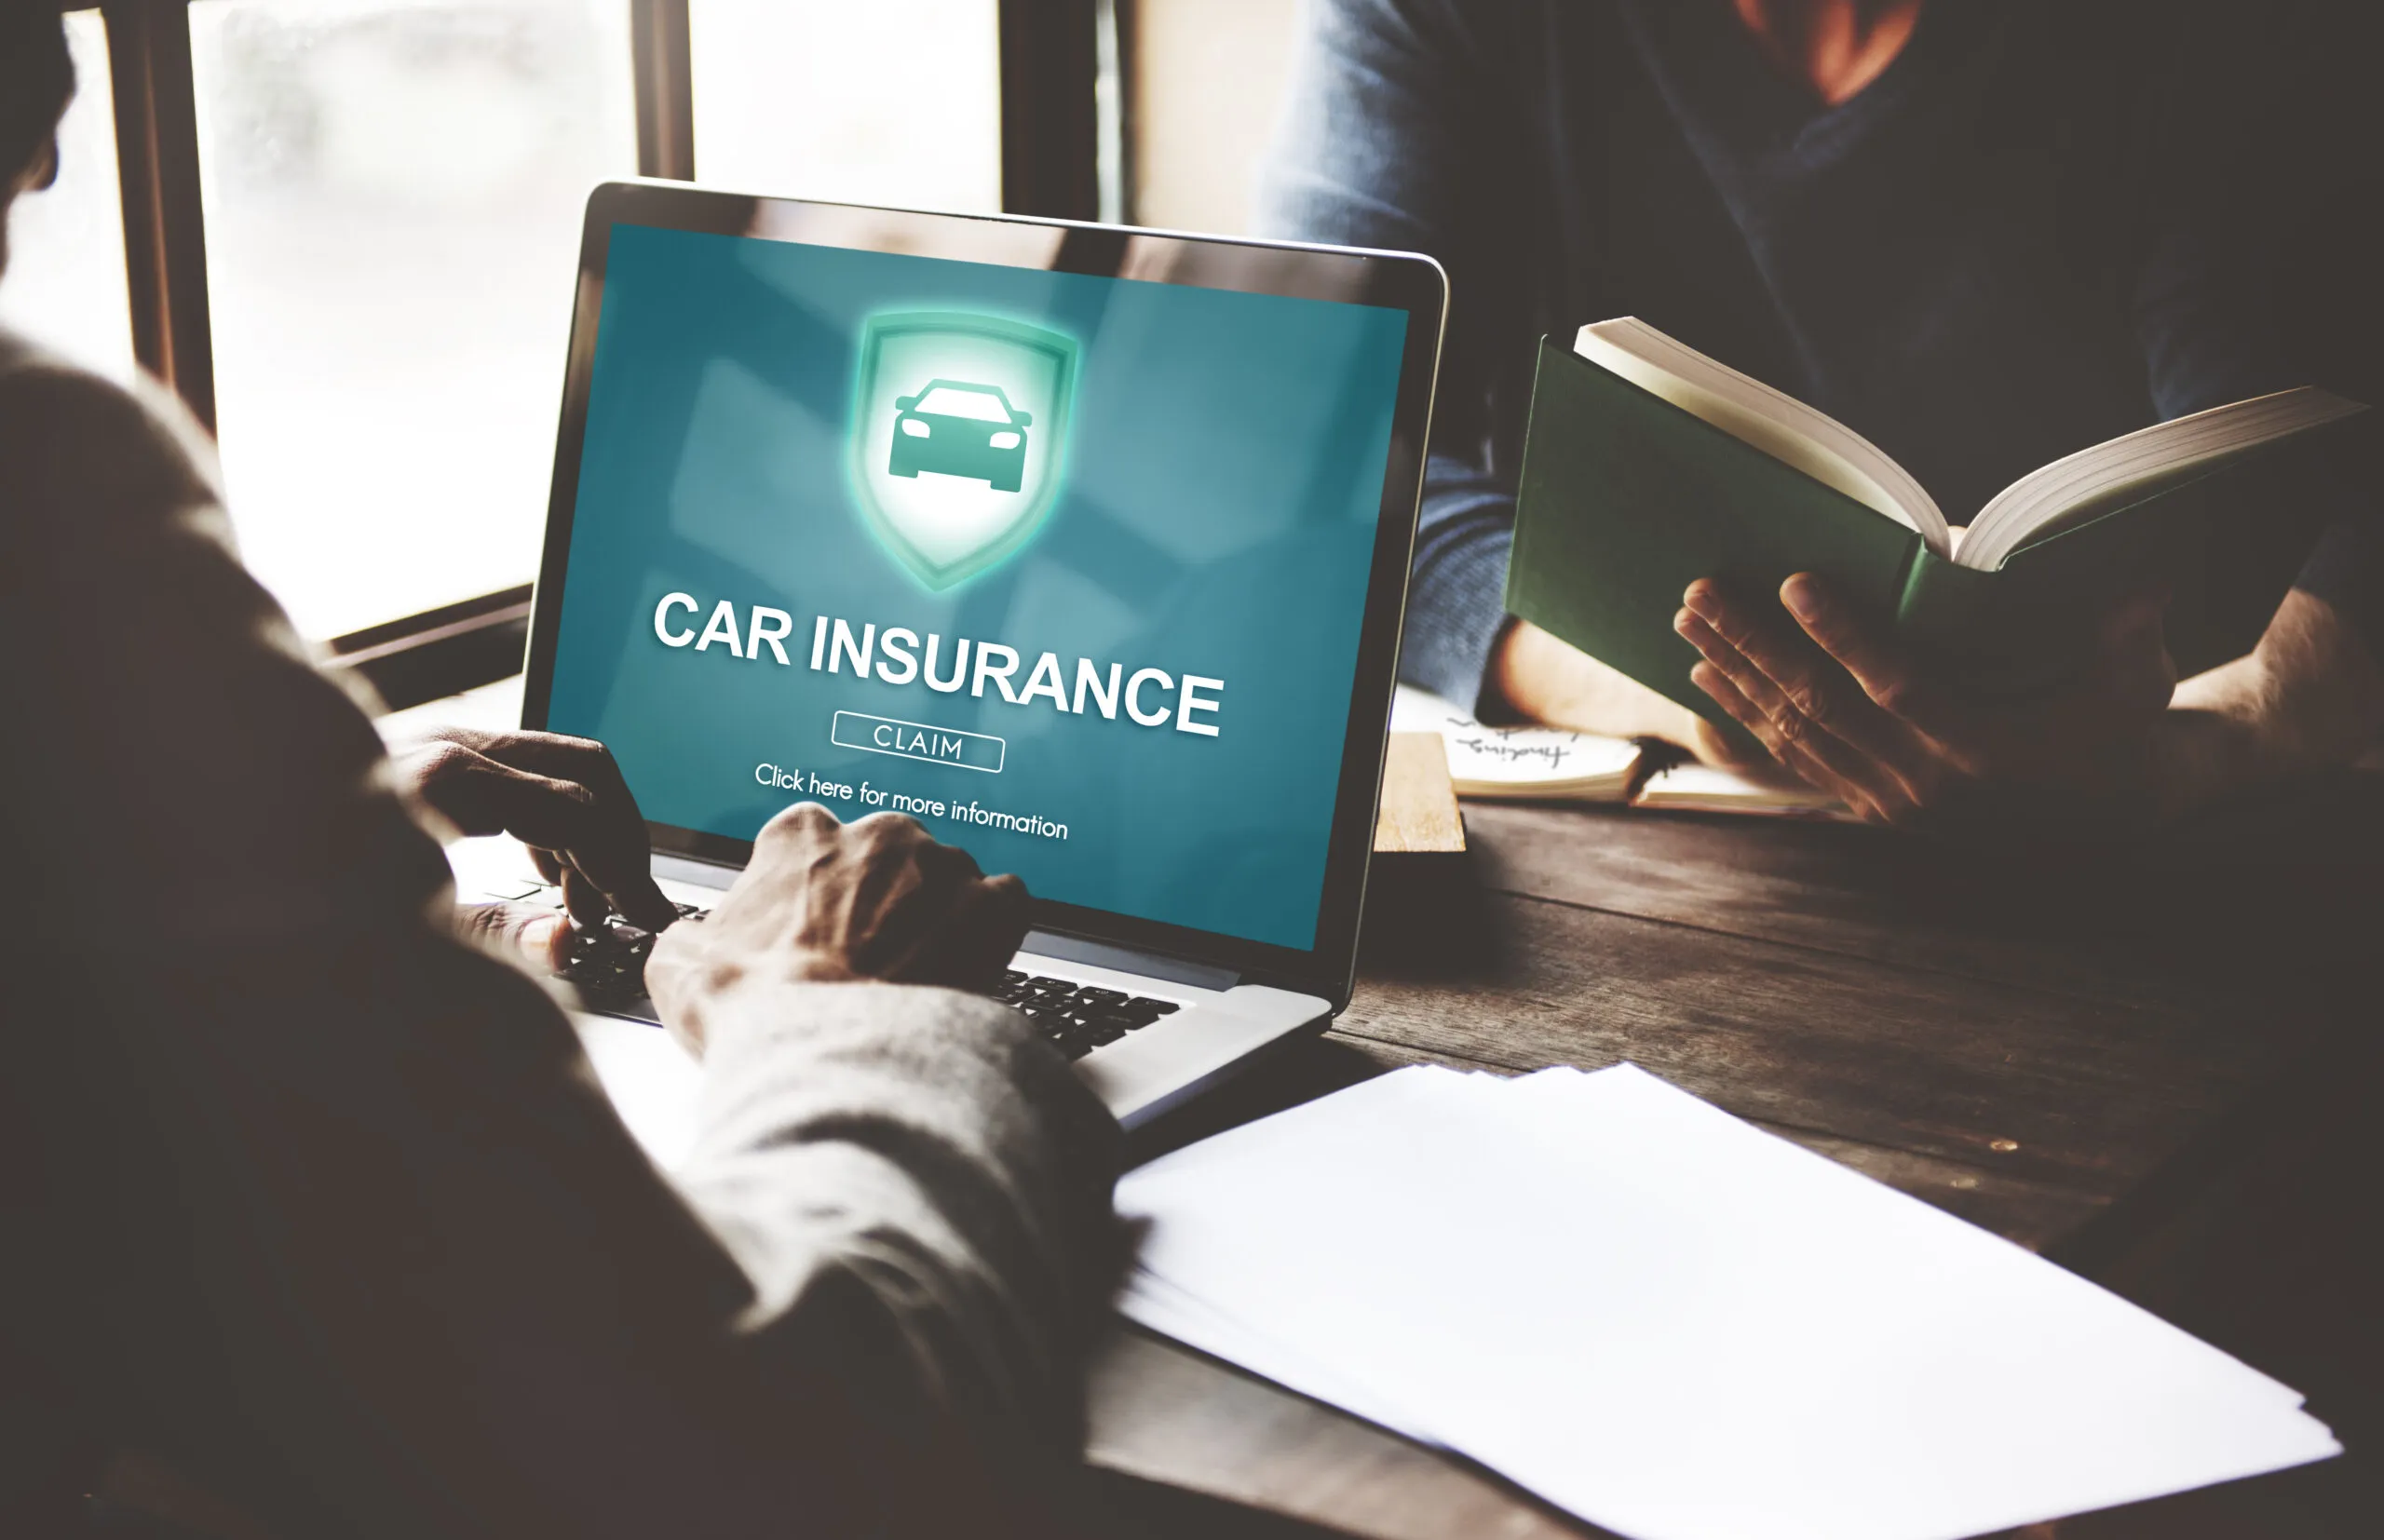 How To Buy Car Insurance: The Best Tips and Tricks